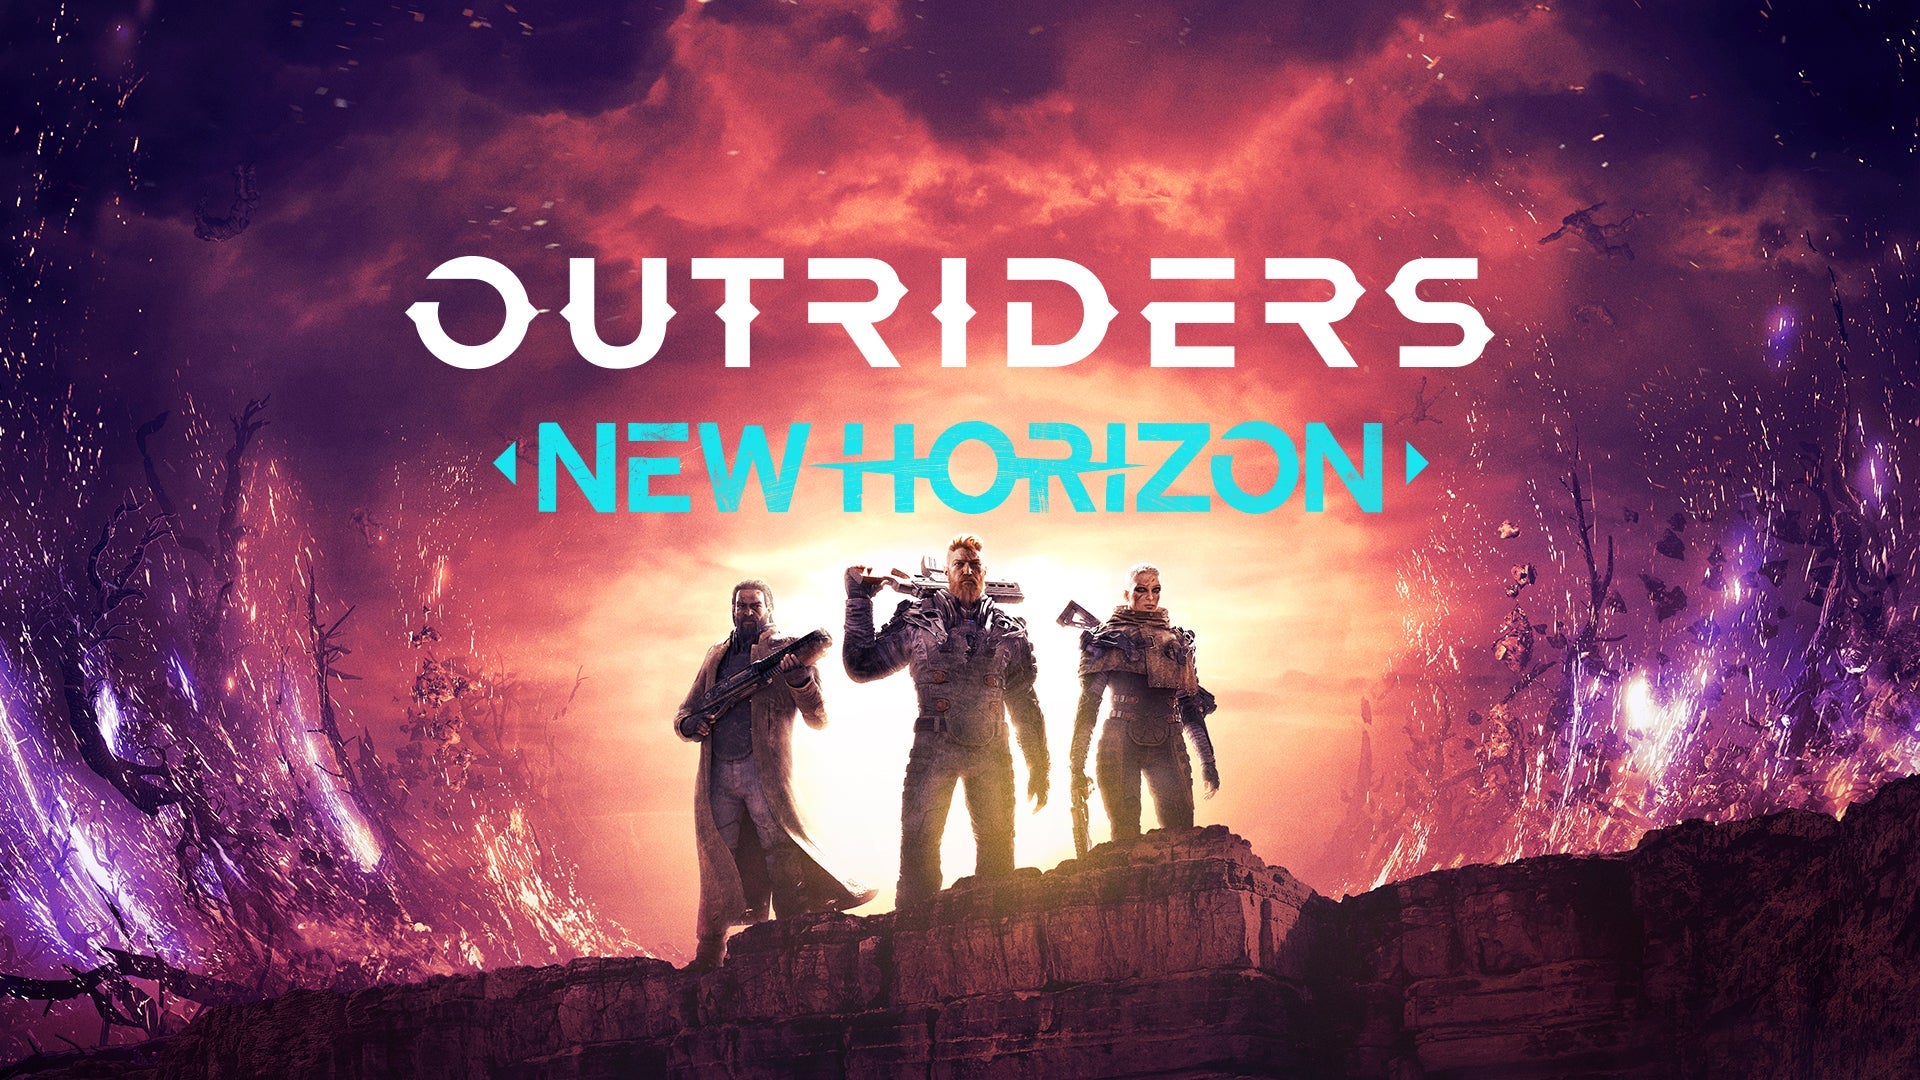 Image for Outriders: New Horizon is a major free expansion that adds four new Expeditions, transmog, and more